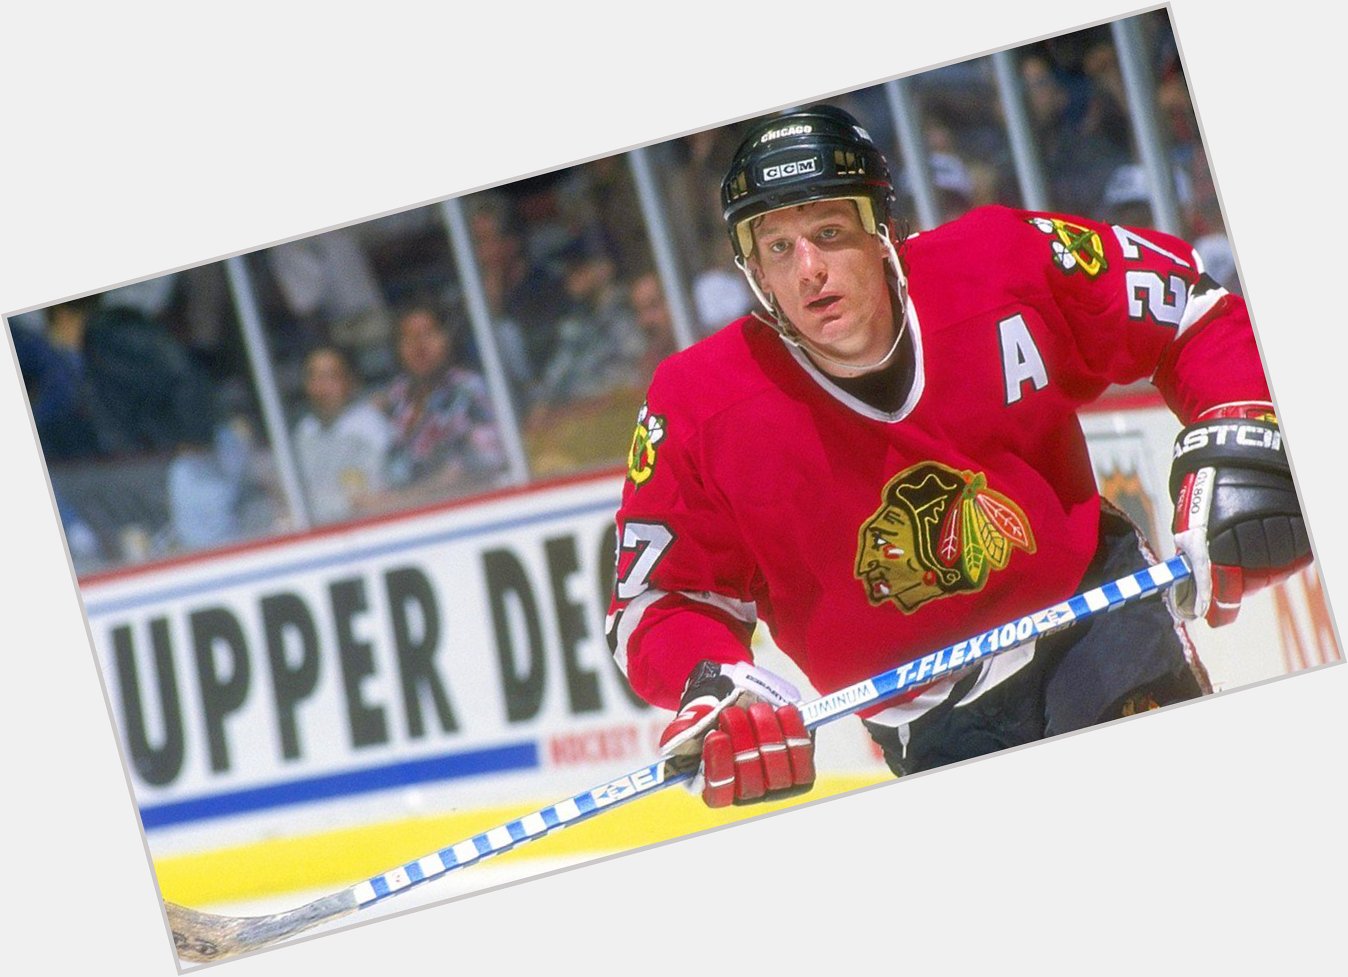 Happy birthday to Jeremy Roenick born on this day in 1970.  